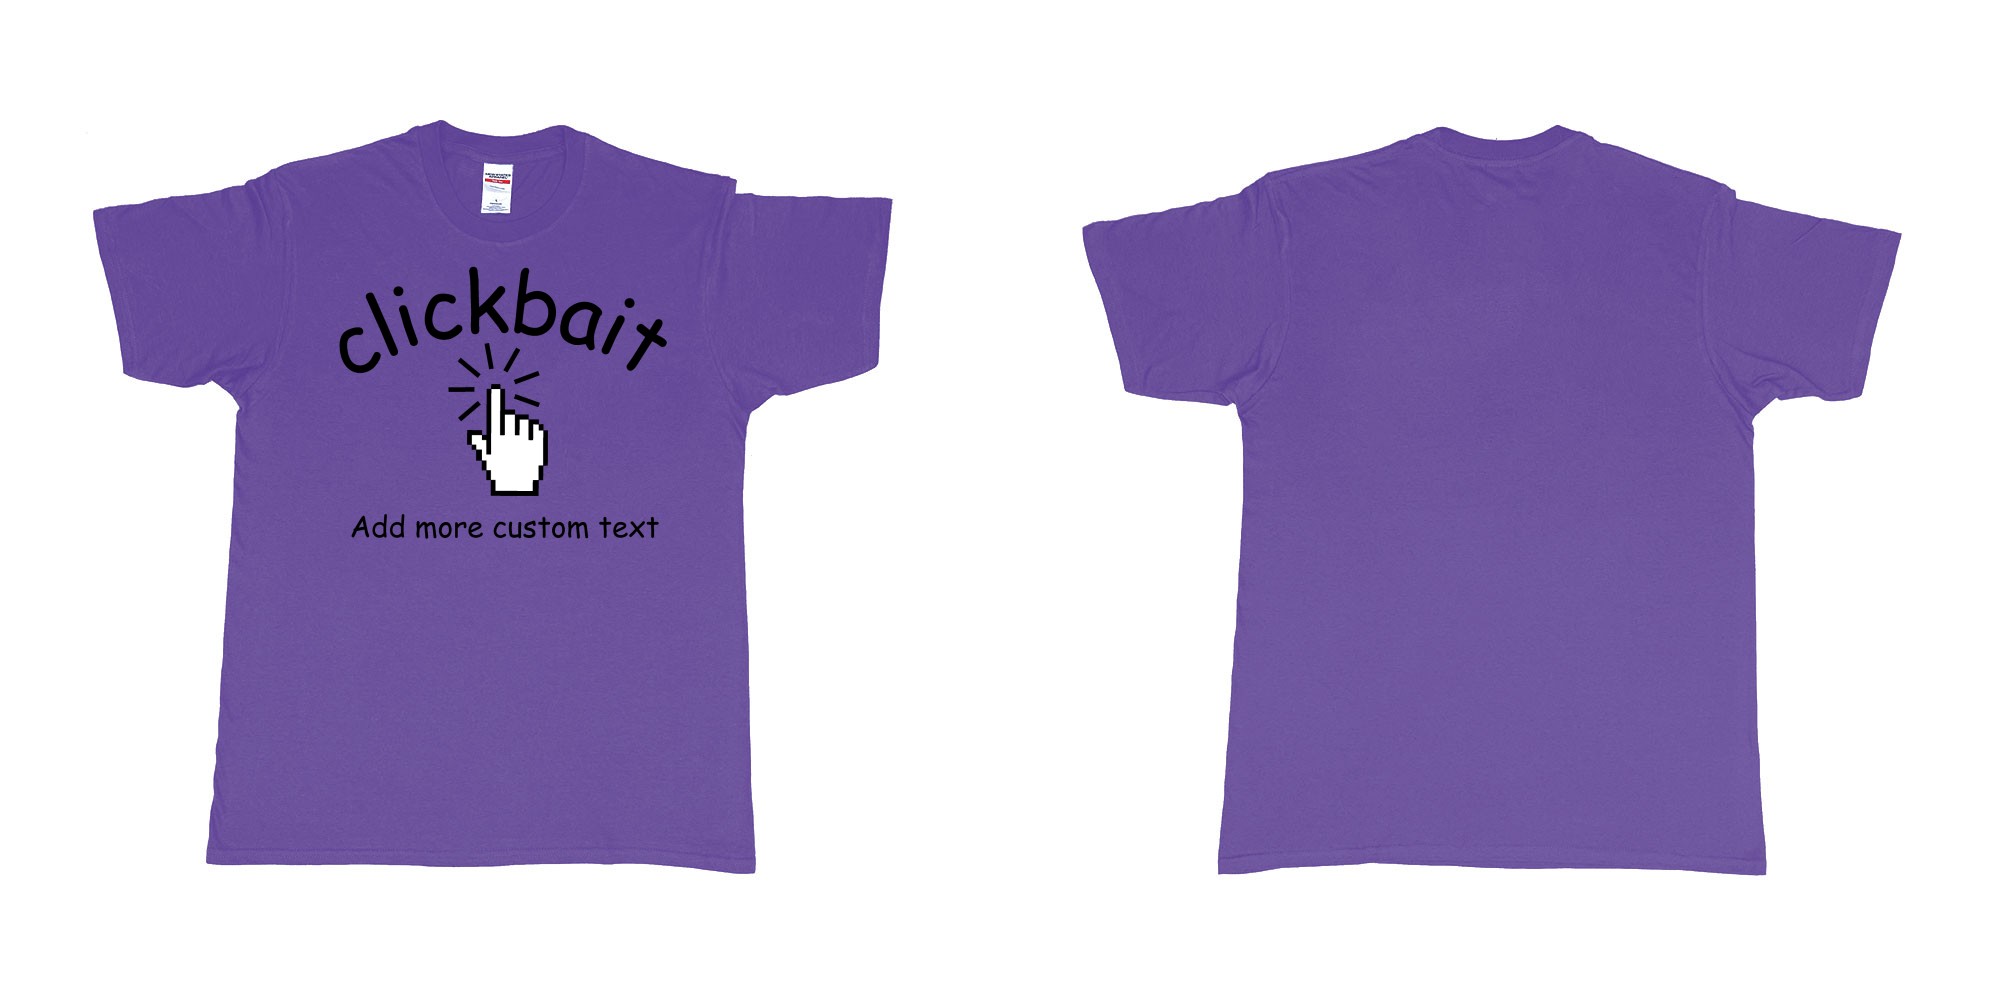 Custom tshirt design clickbait mouse click custom text tshirt printing in fabric color purple choice your own text made in Bali by The Pirate Way